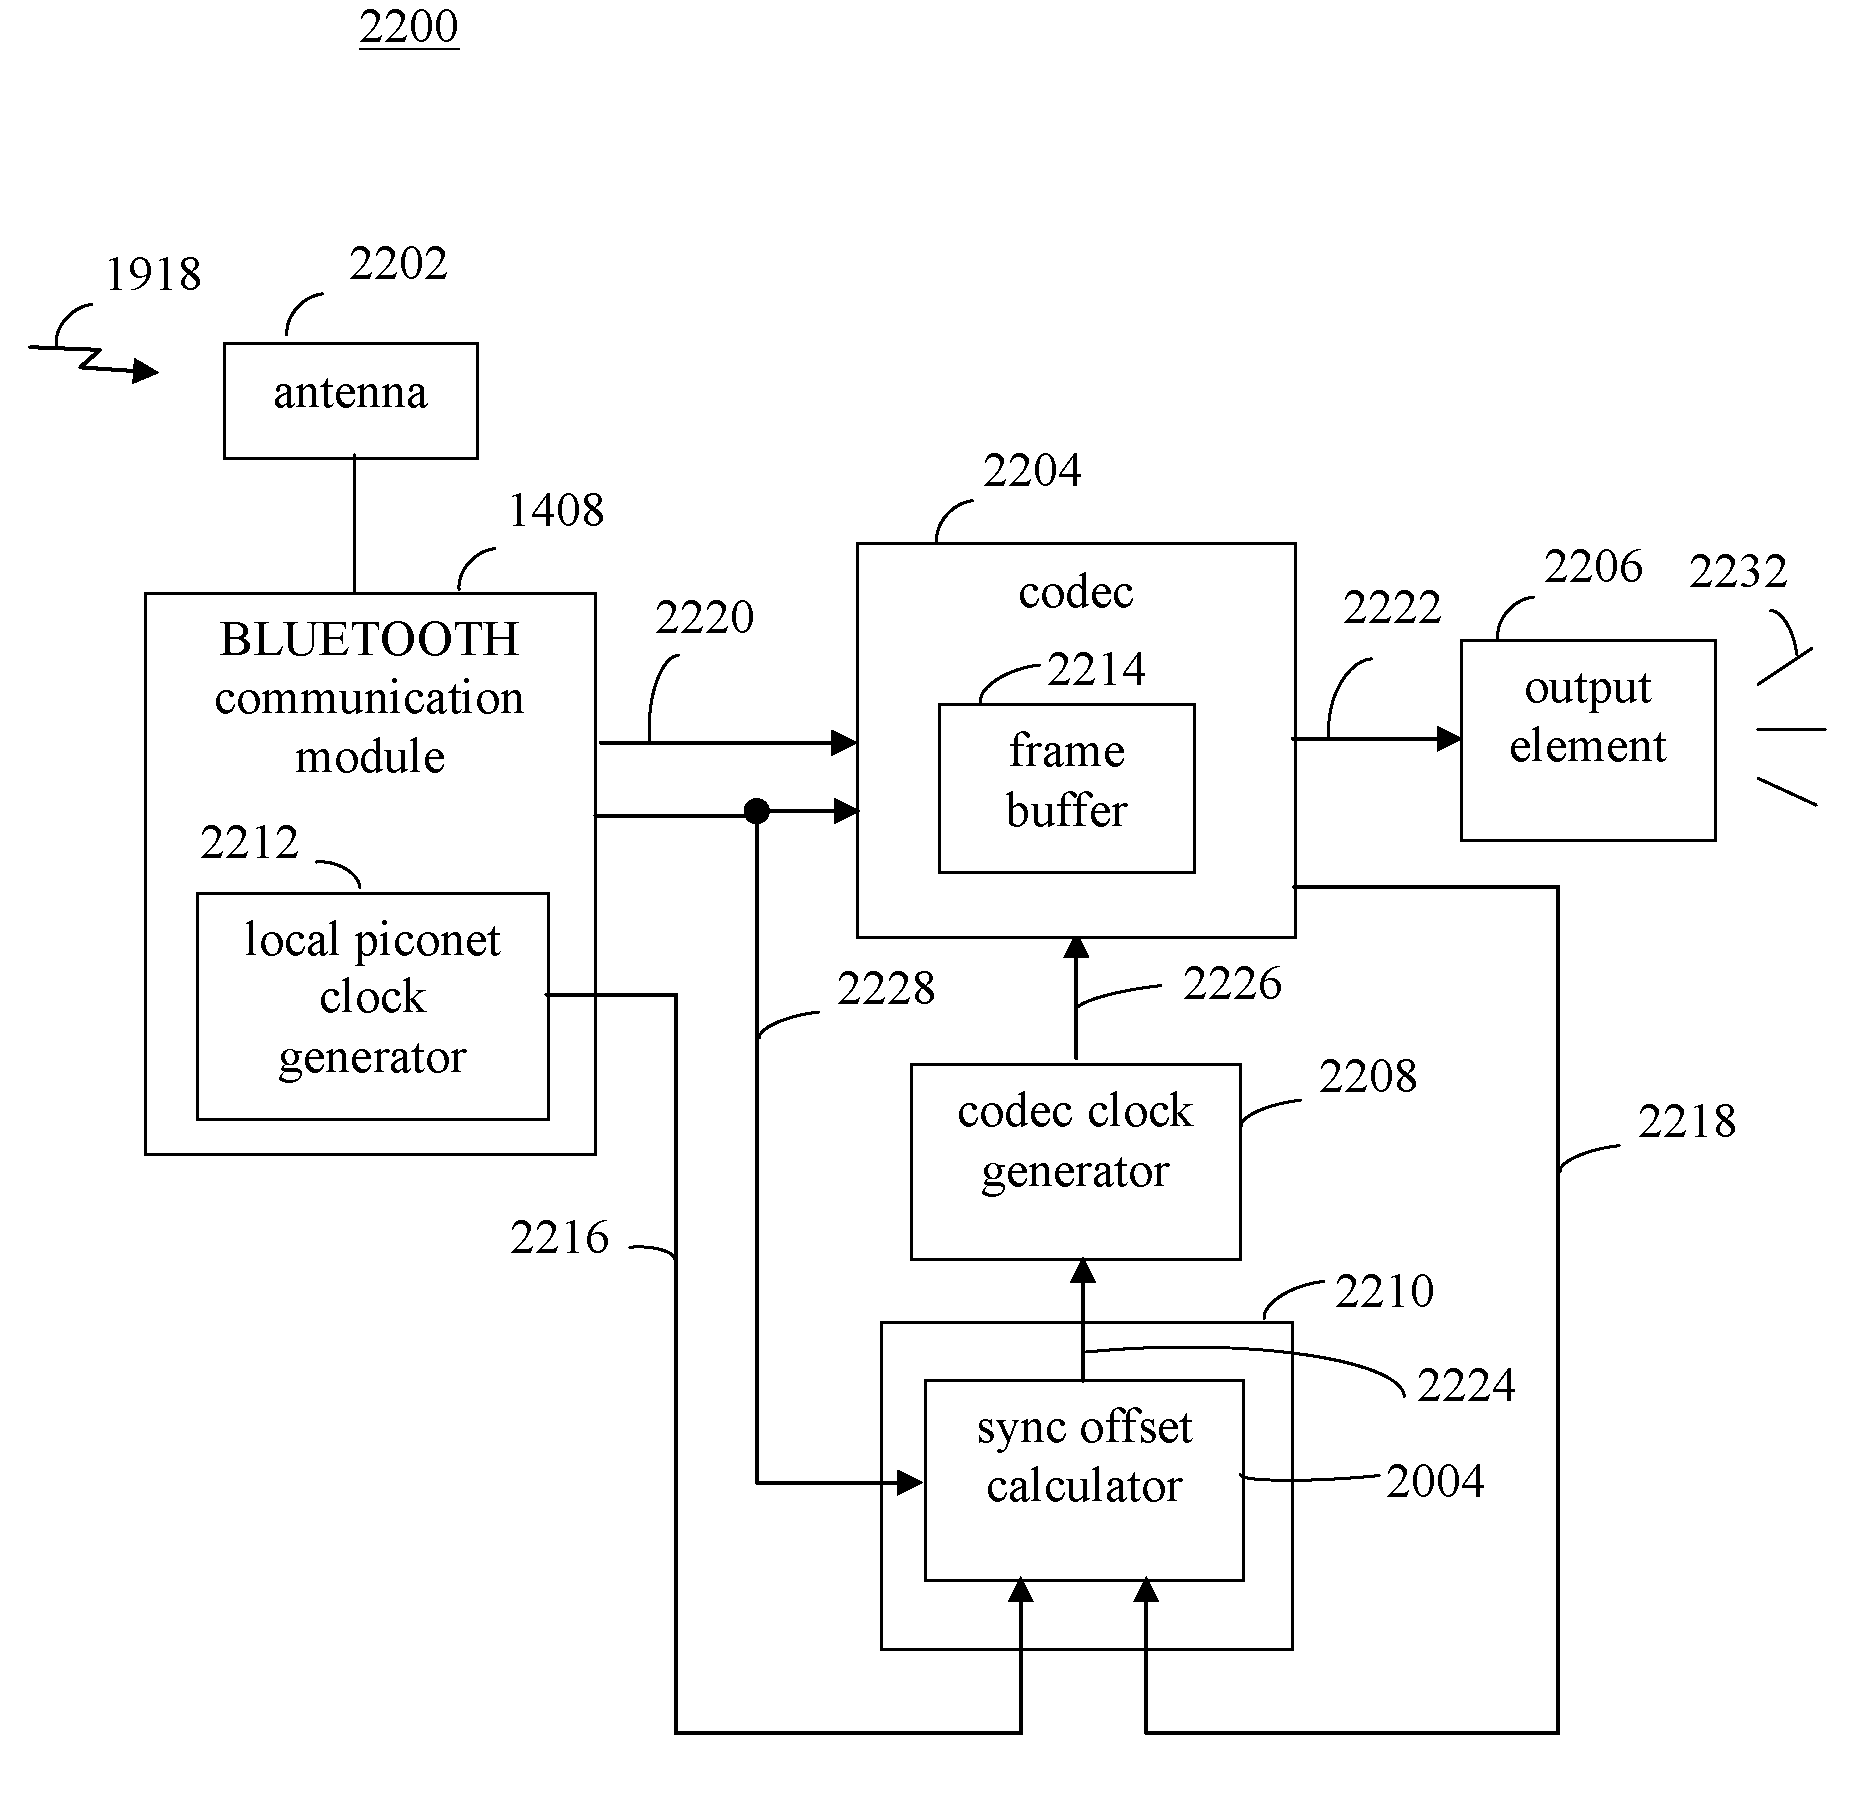 Synchronization of media data streams with separate sinks using a relay